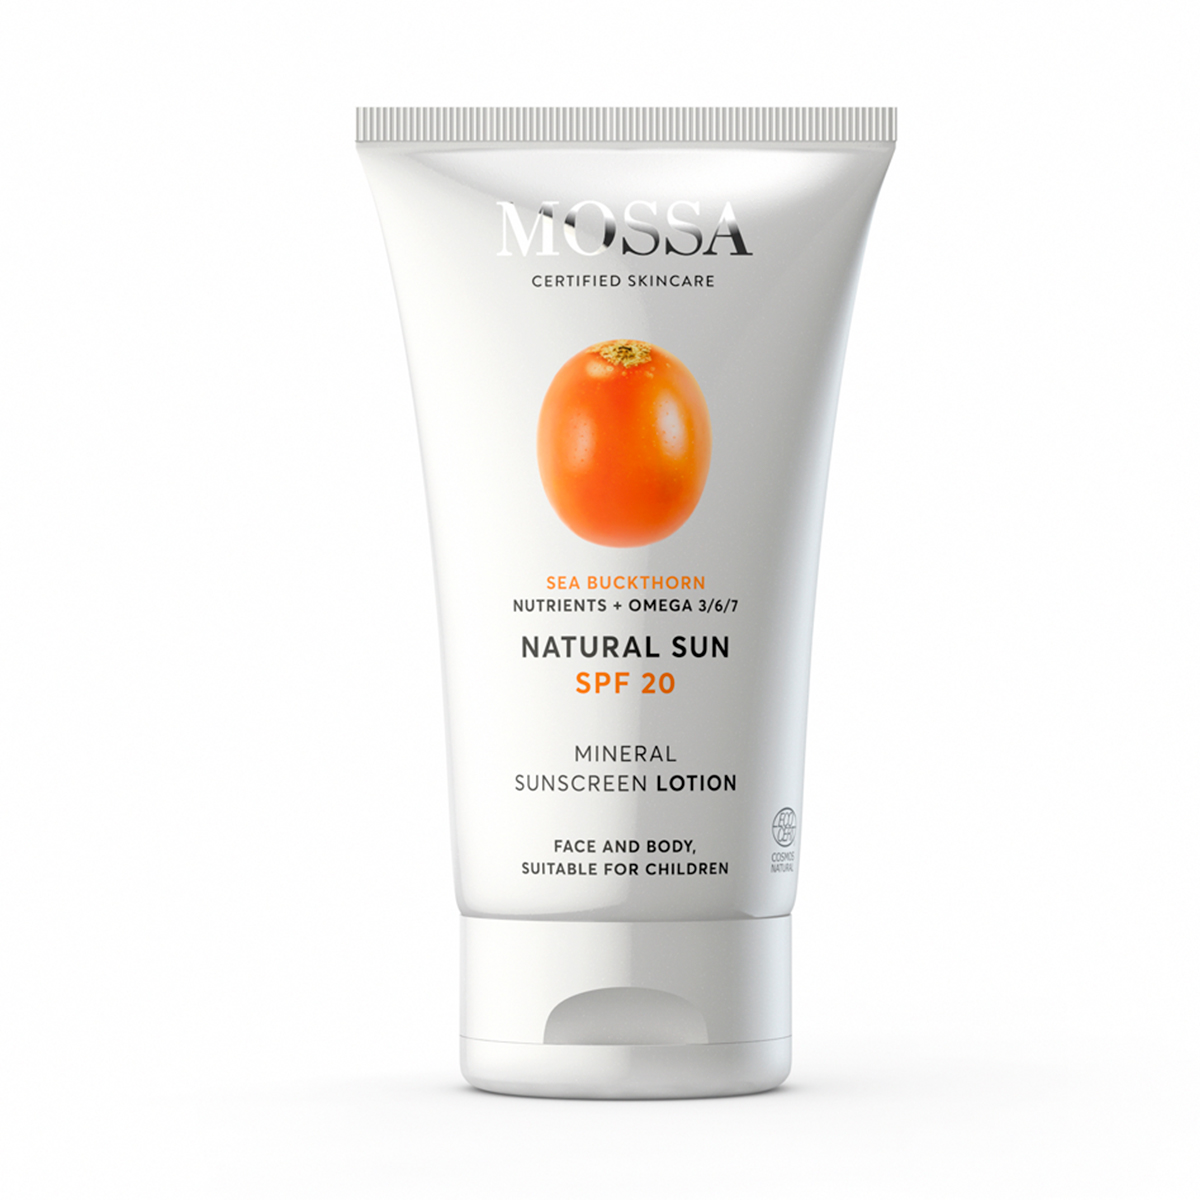 NATURAL SUN Mineral Sunscreen Lotion,  MOSSA Body Lotion